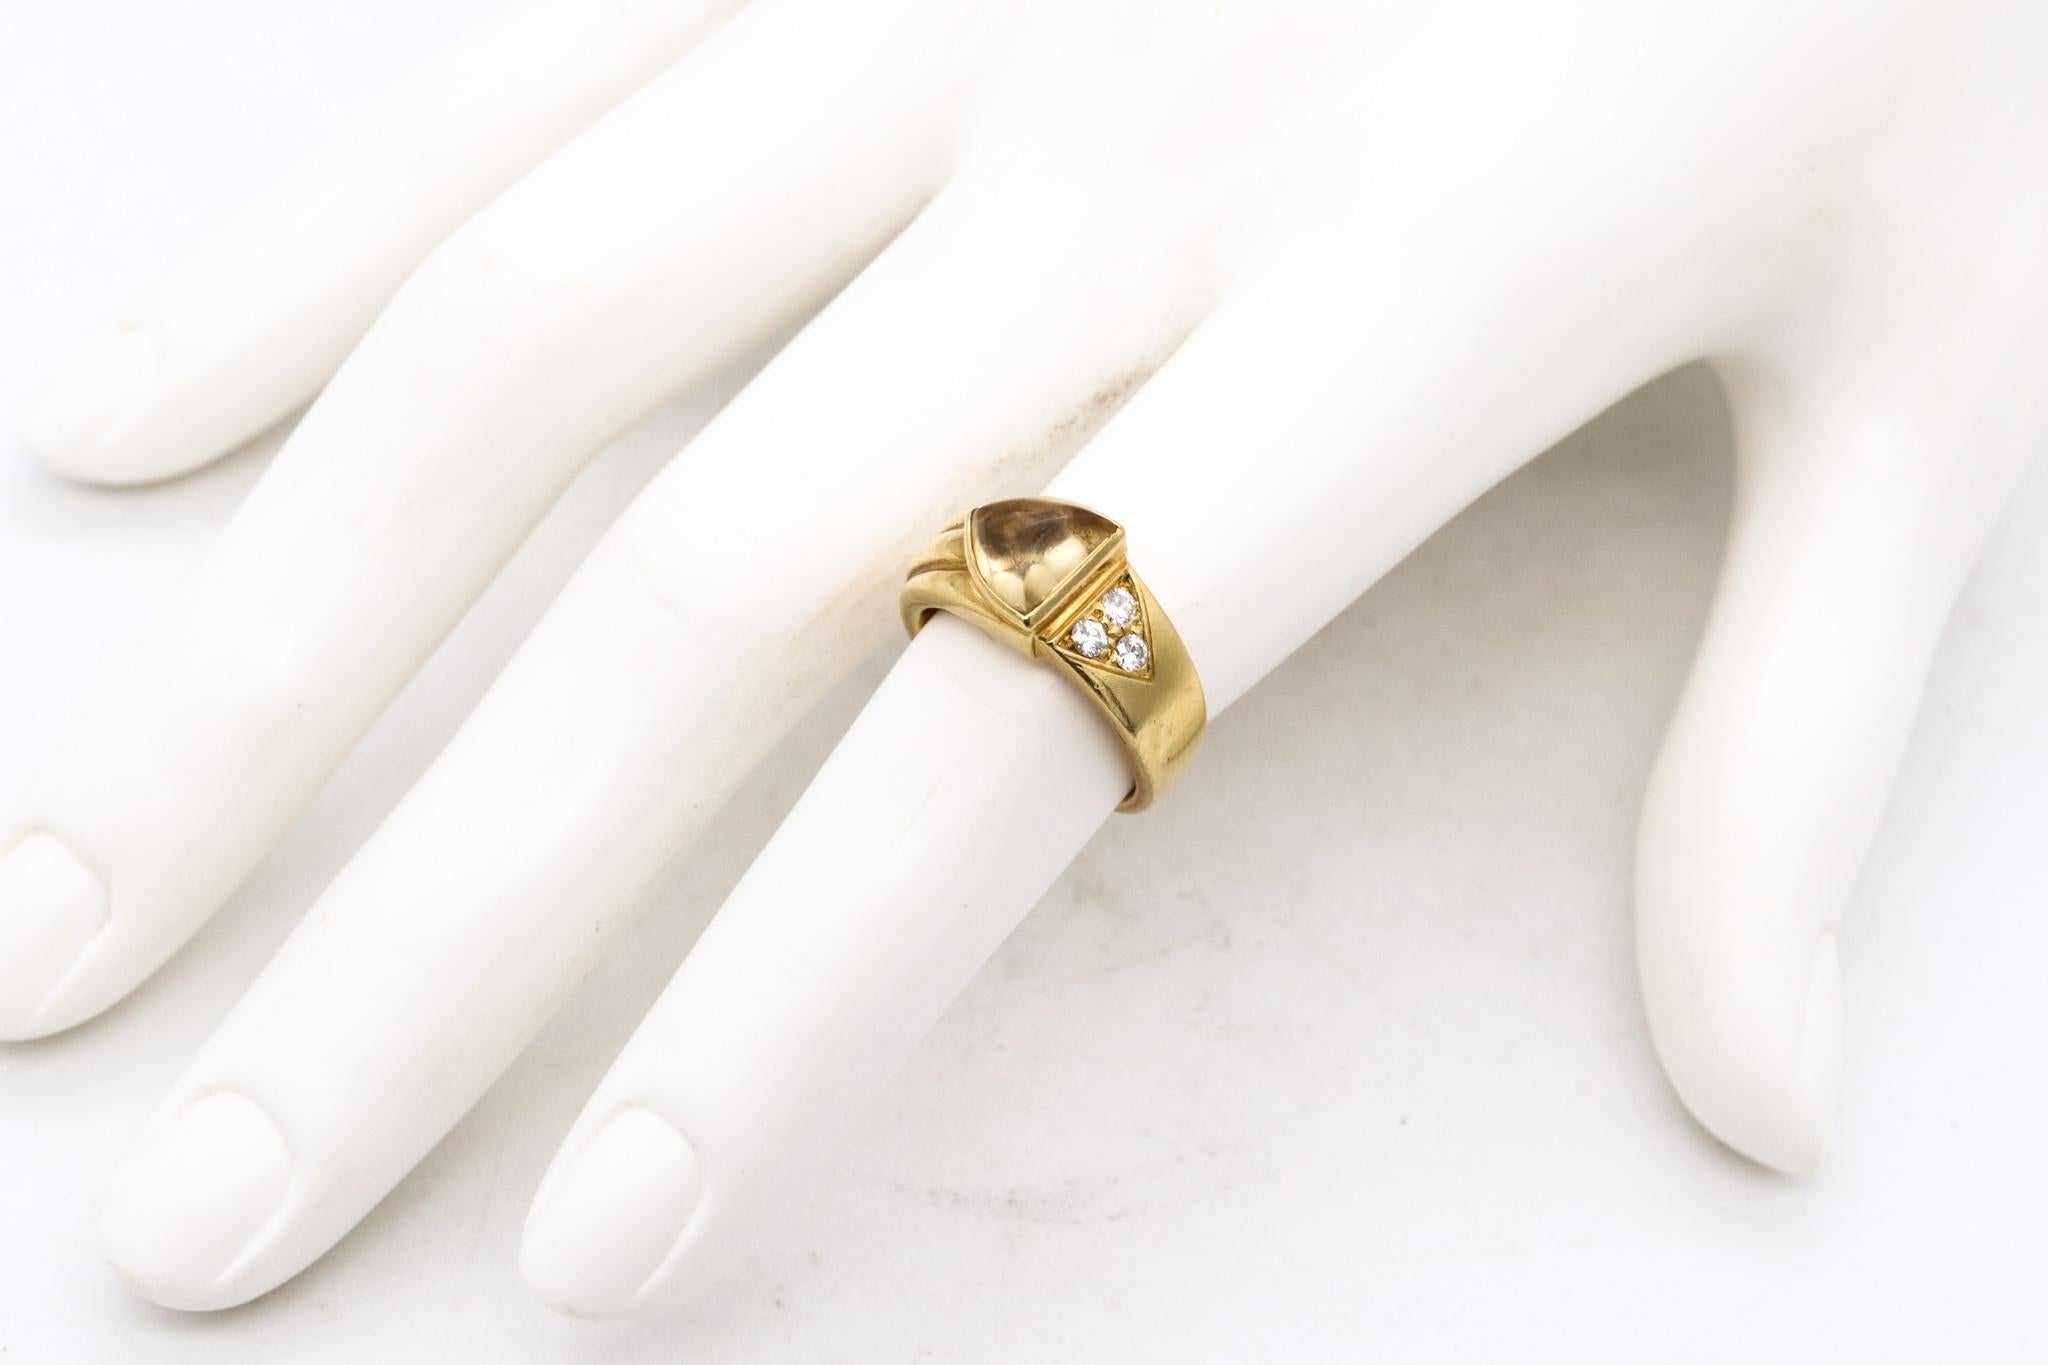 A ring designed by Cartier.

Very cute piece hand crafted in solid 18 karats yellow gold and mounted with gemstones.

Bezel set, with one cabochon trillion cut (7 x 7 x 4 mm) of a natural citrine of 1.60 carats.

Accented with 3 round brilliants